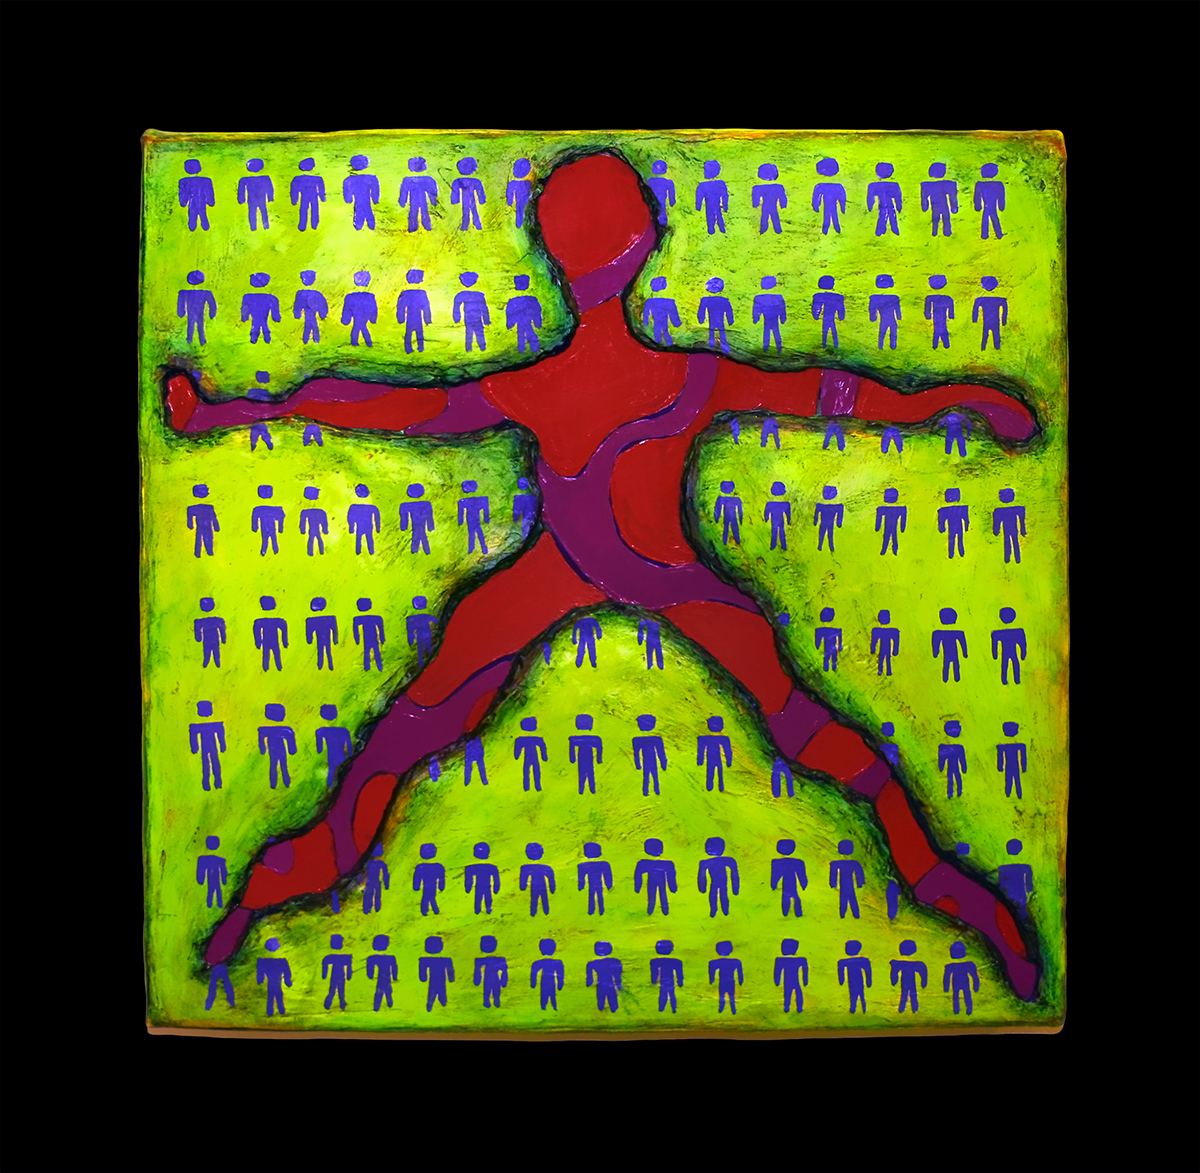 ART POP symbols Form figure frown smile dolphin dancing vetruvian man crowd angel rainbow signs Repetition infinity